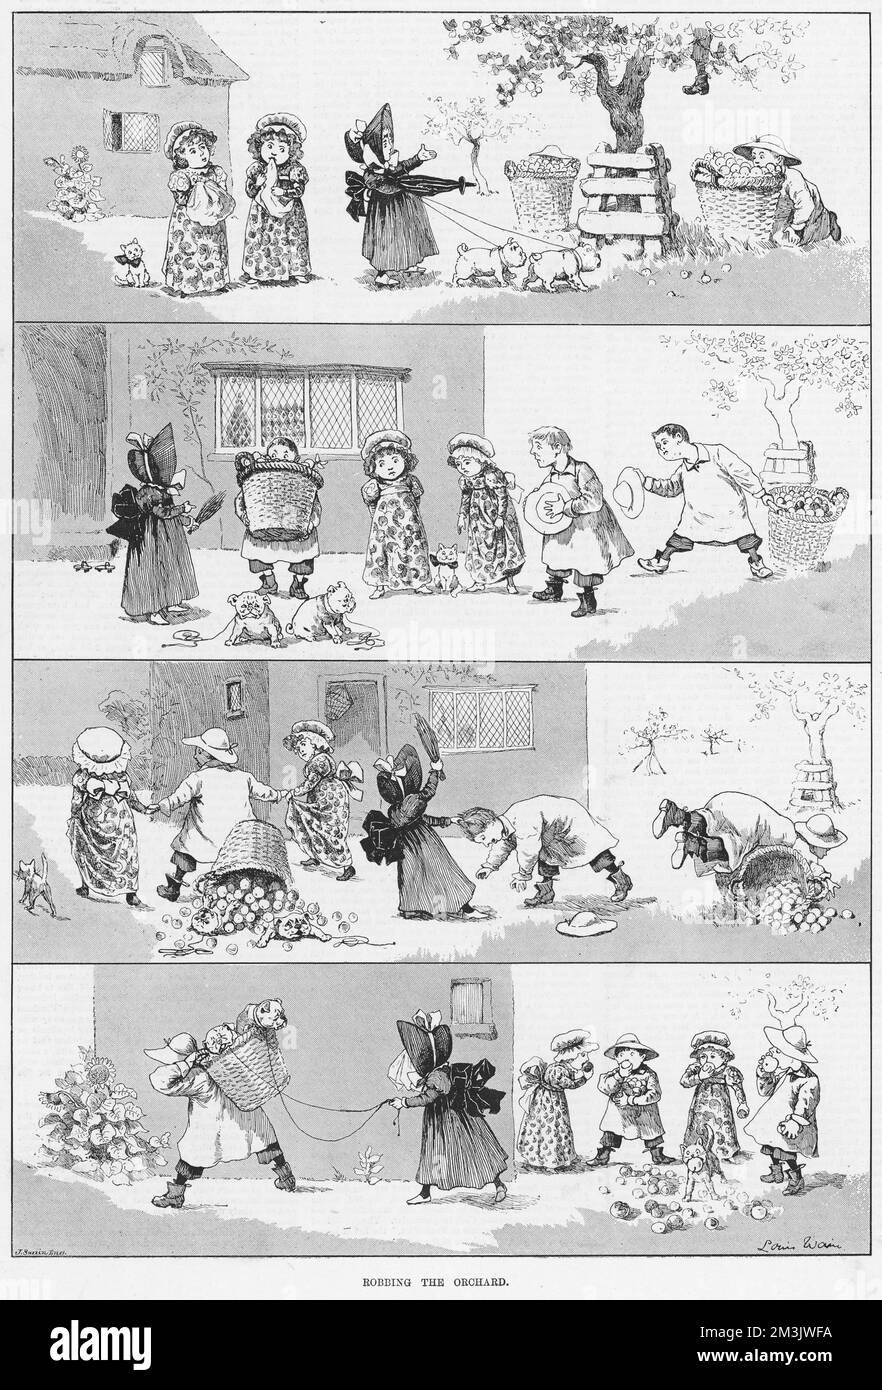 An unusual illustration by Louis Wain, more usually known for his cat drawings, showing a group of children stealing apples from an orchard. Interestingly, Wain has drawn the children in the style of Kate Greenaway, another ILN contributor. Wain was able to turn his hand to drawing a wide variety of subjects prior to the fame he achieved with his feline creations. Sadly his growing obsession with cats turned to insanity and he died penniless in a mental asylum in 1939. Stock Photo